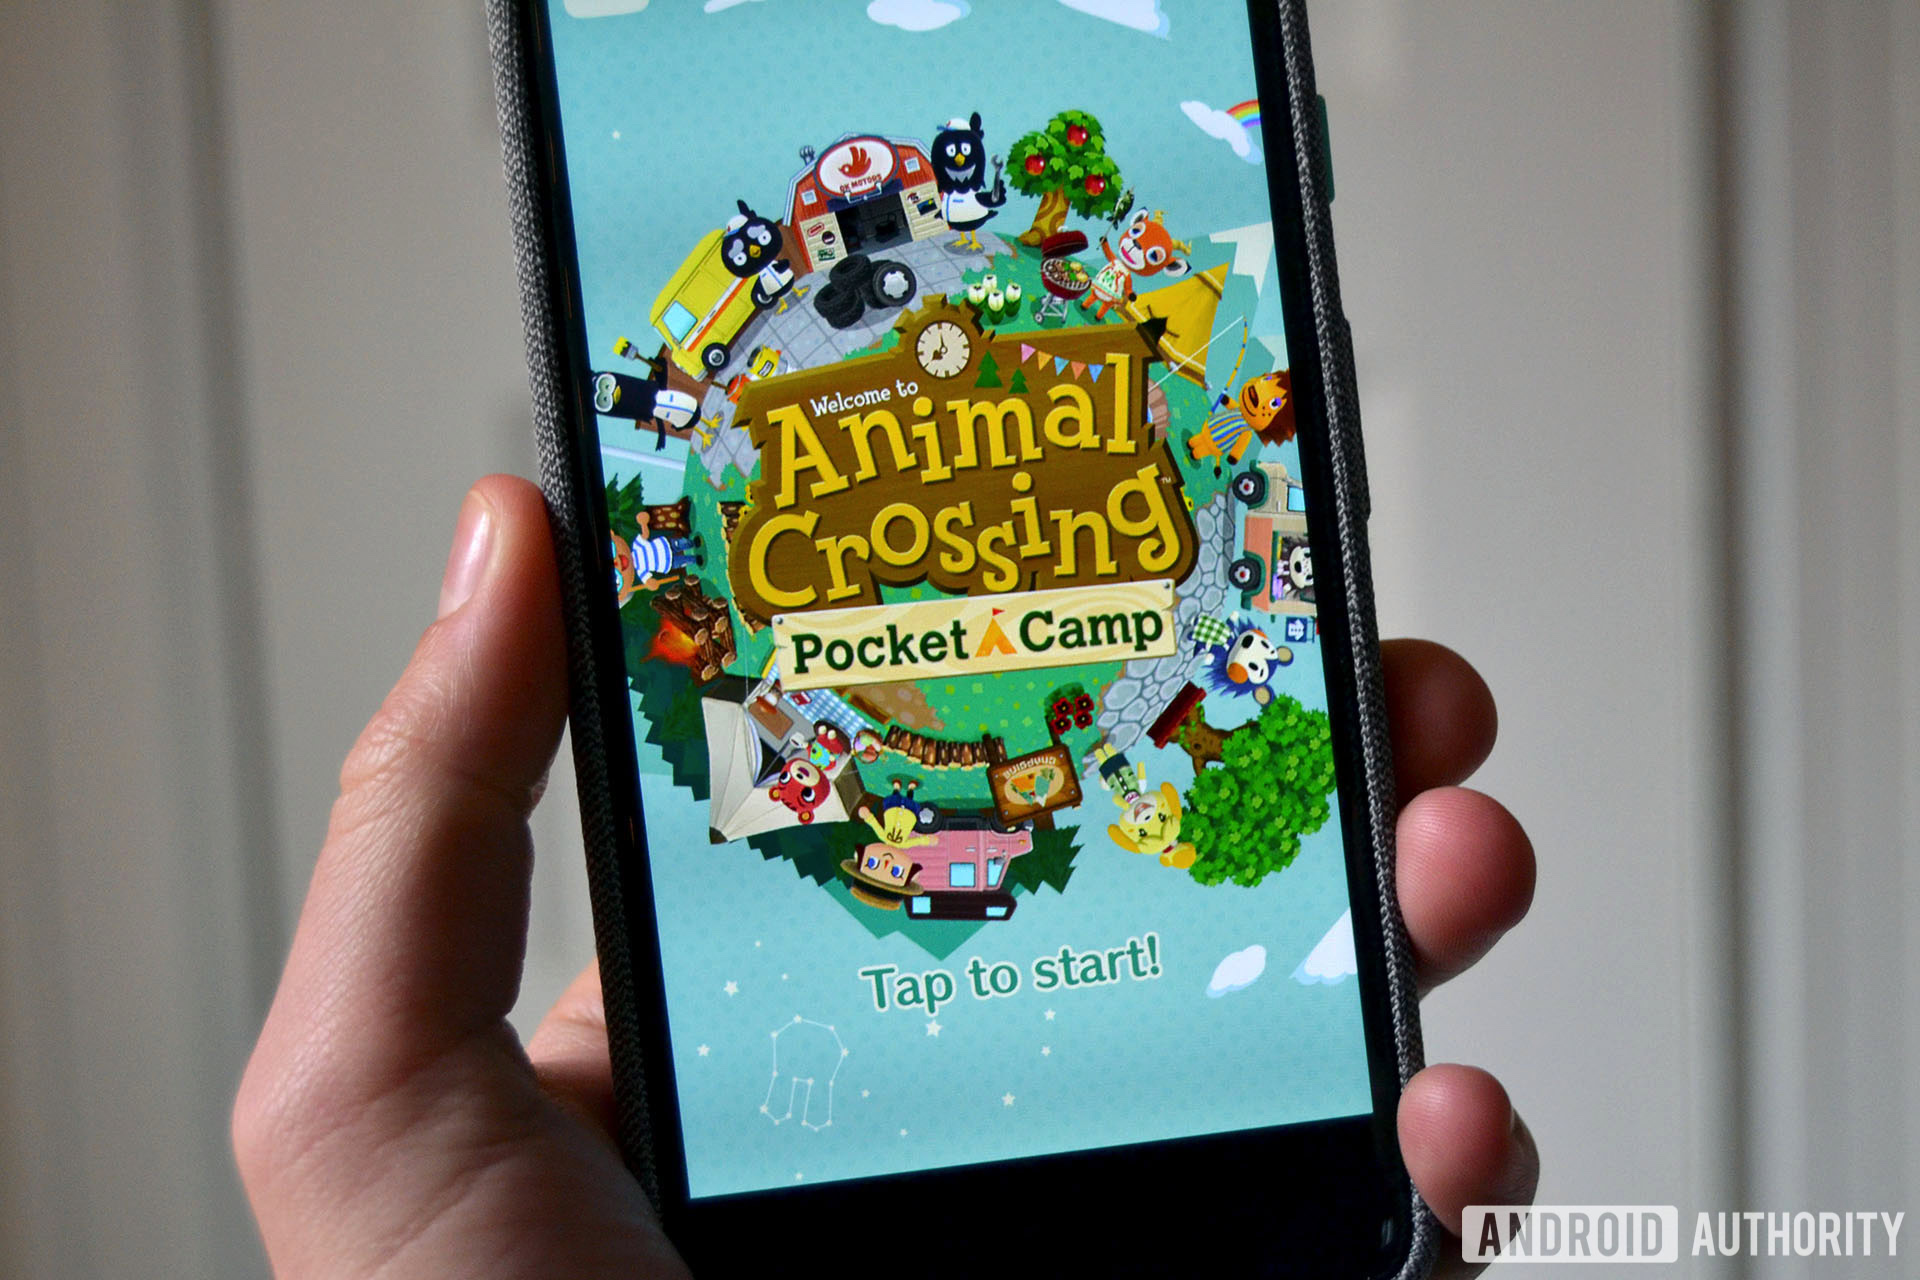 10 best games like Animal Crossing for Android Android Authority